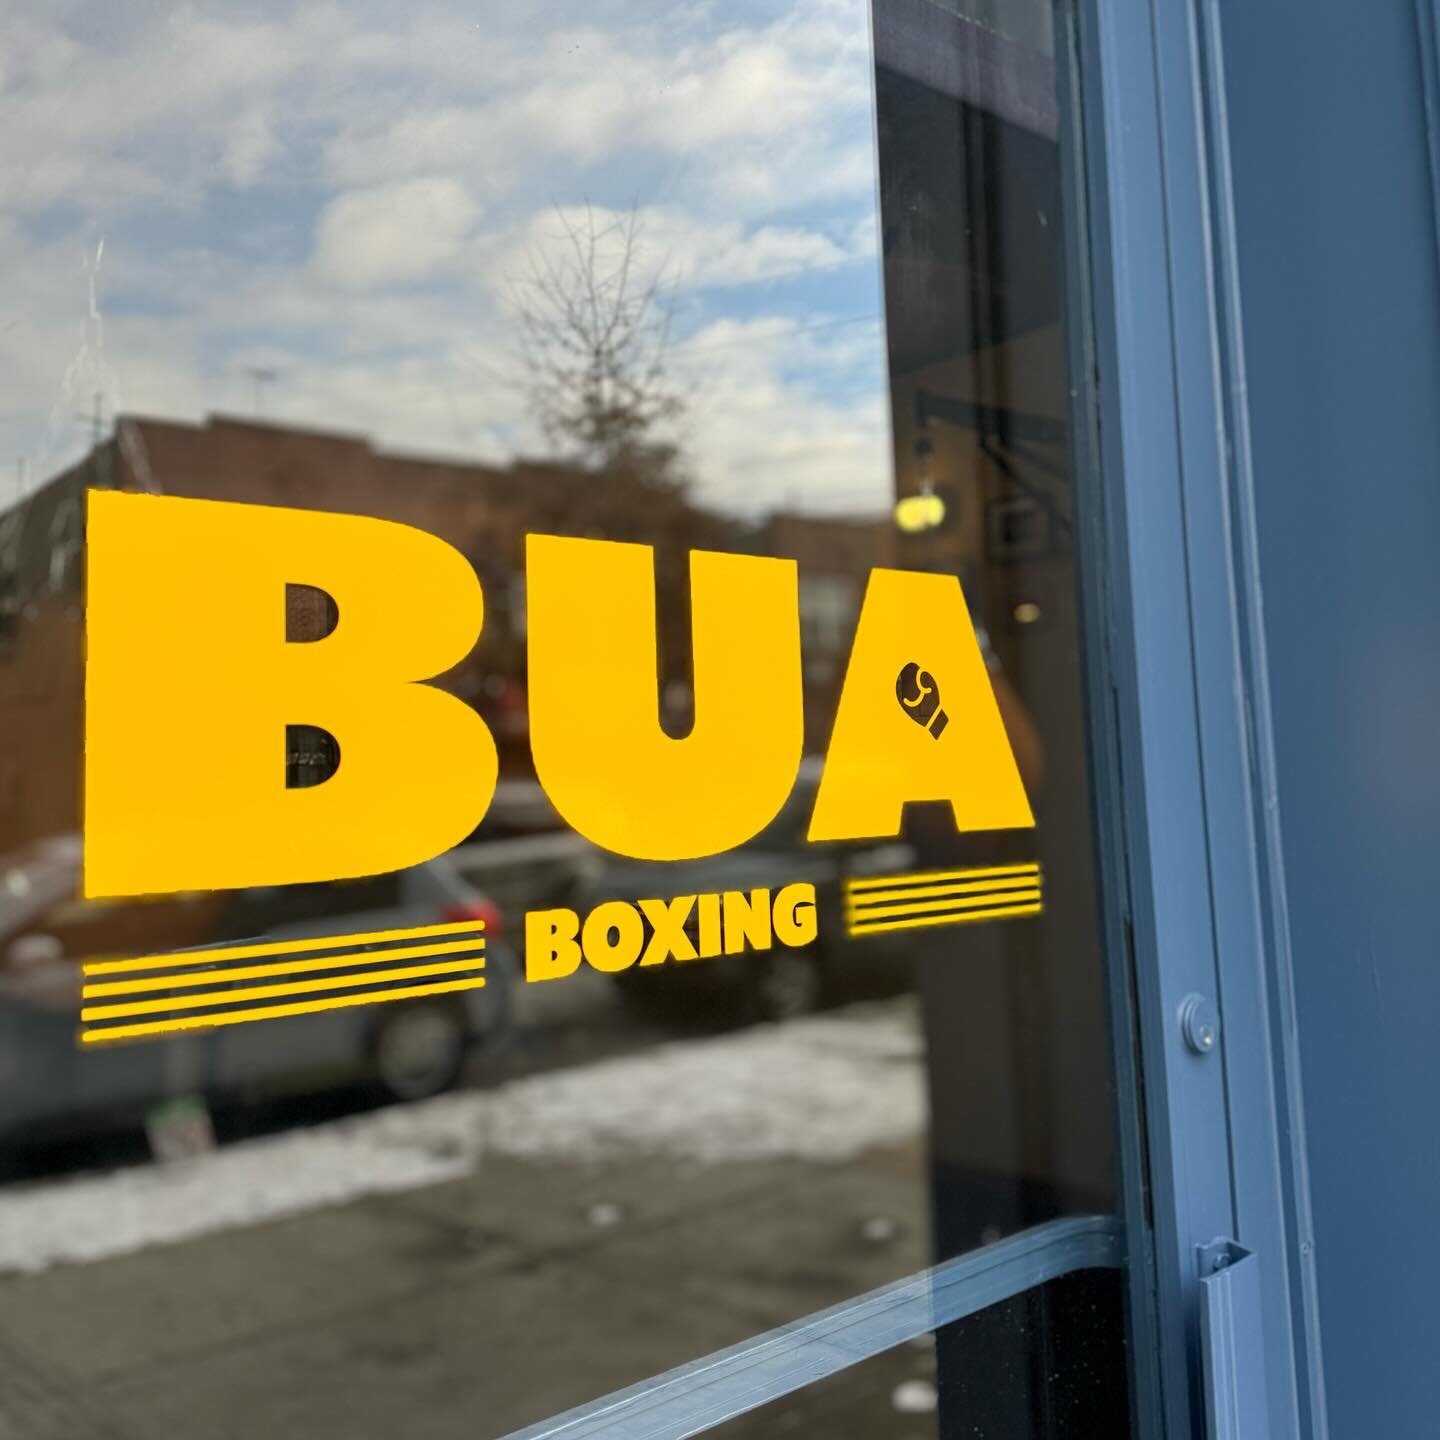 We&rsquo;re looking forward to welcoming many new faces through the door this week! 🥊 Our aim is to build an inclusive and welcoming community based around a shared passion for boxing, fitness, and overall well being 🥊

Info on what we offer, our f